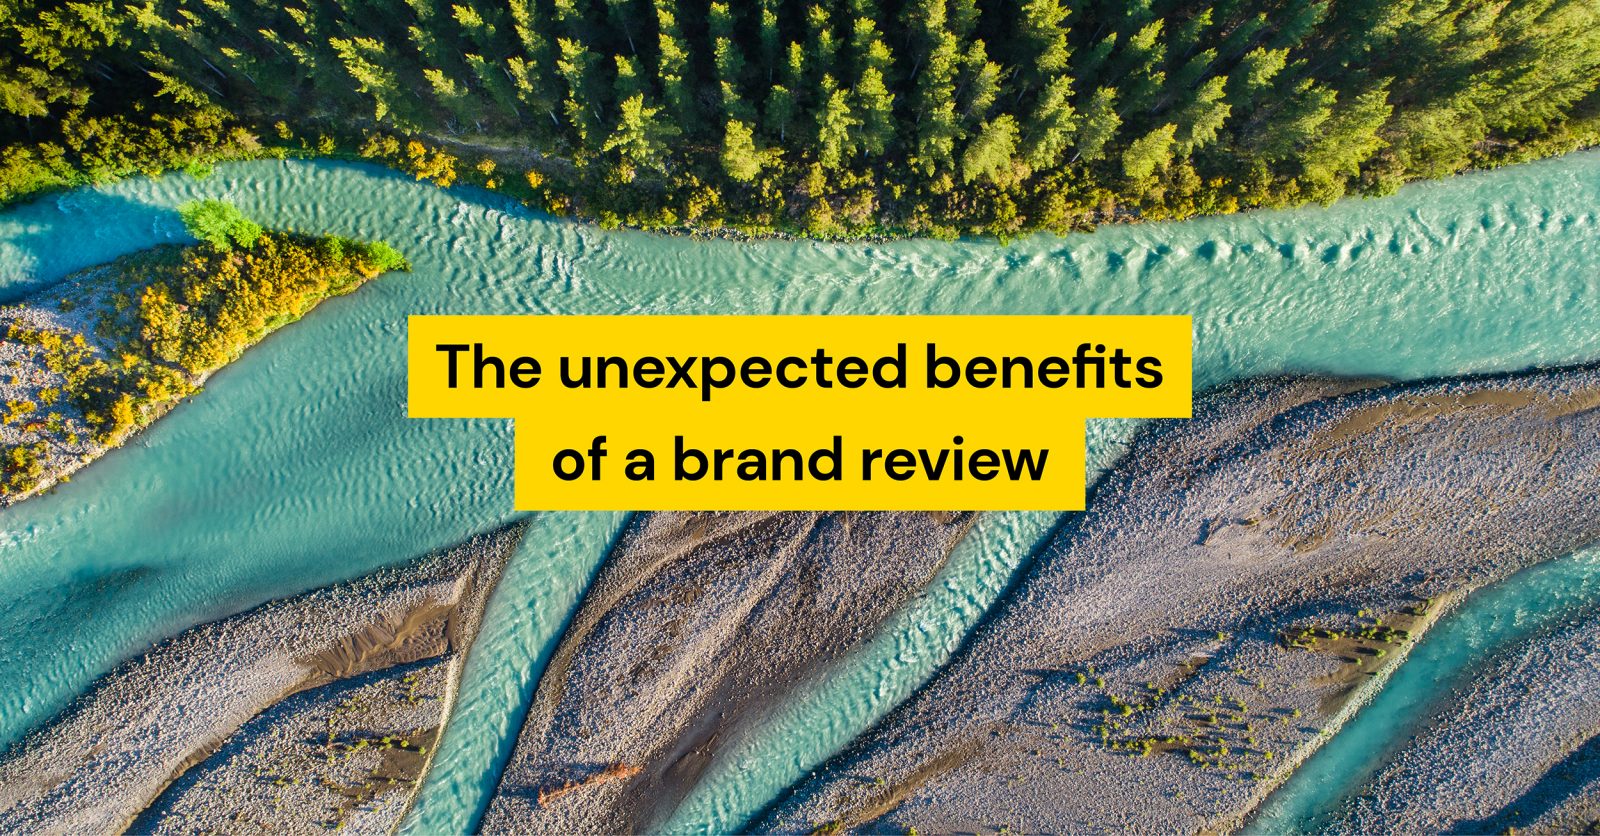 The unexpected benefits of a brand review